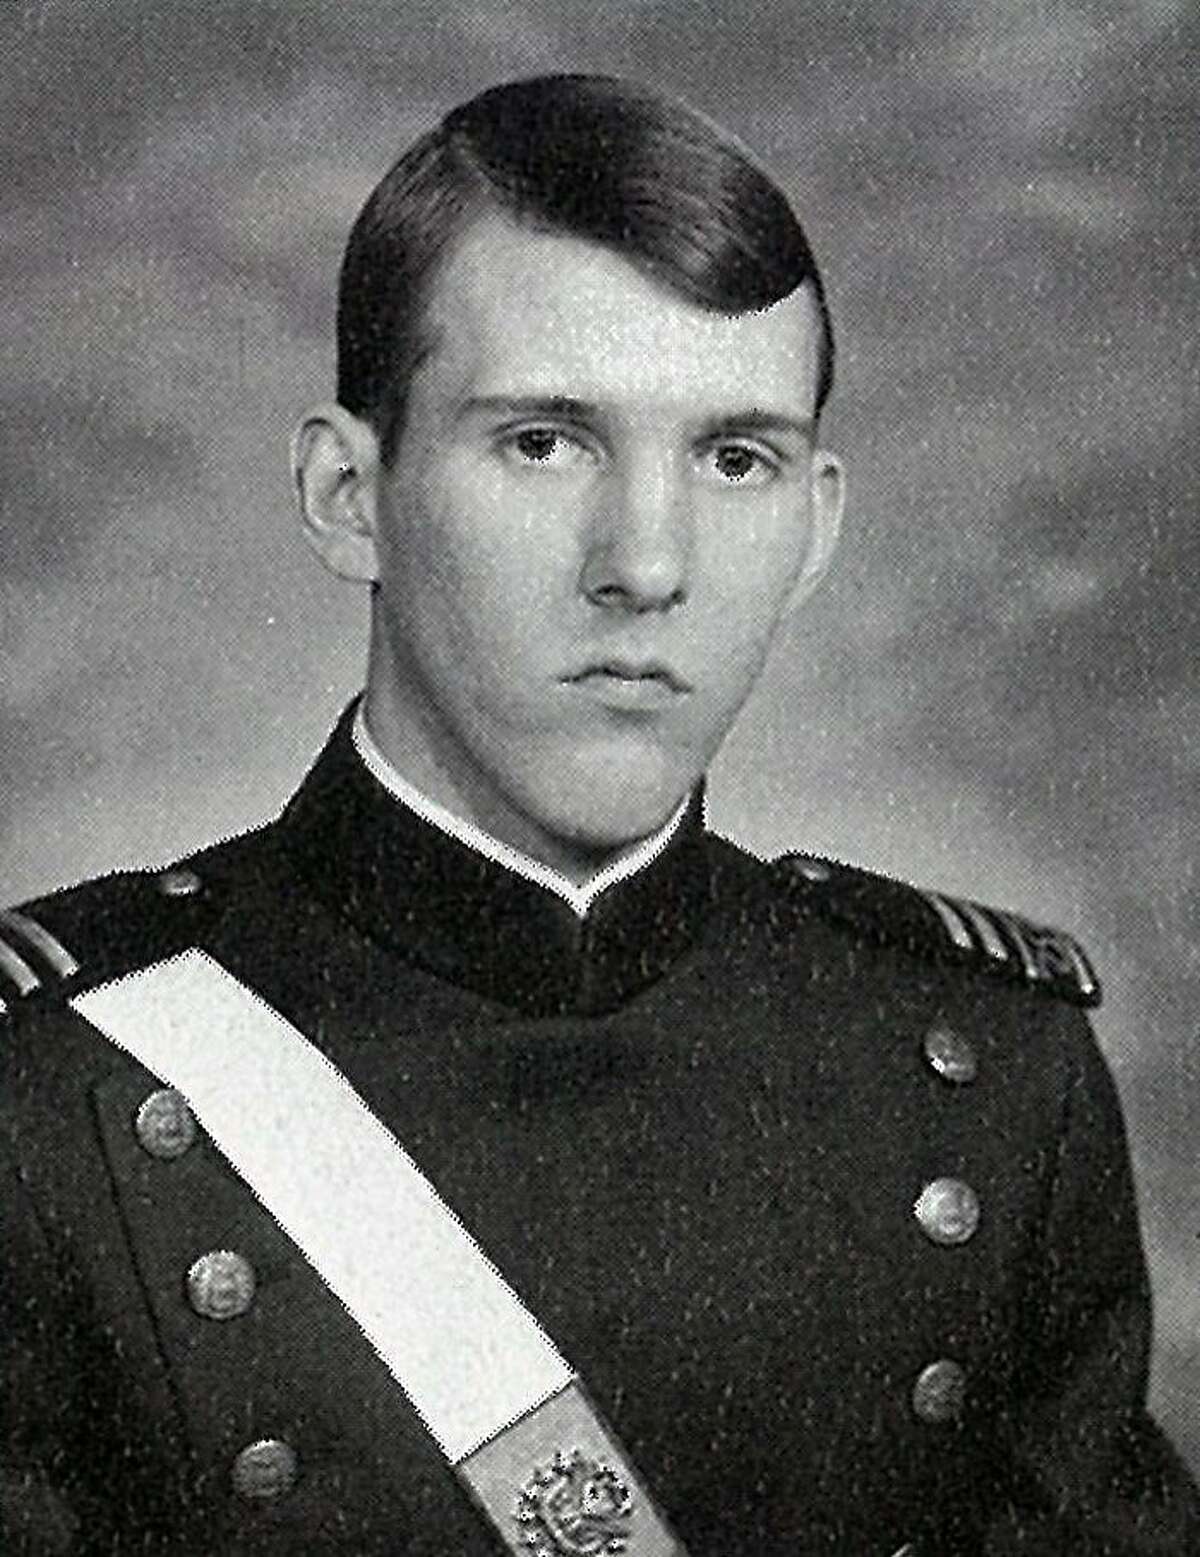 Spurs coach Gregg Popovich from his Air Force Academy yearbook